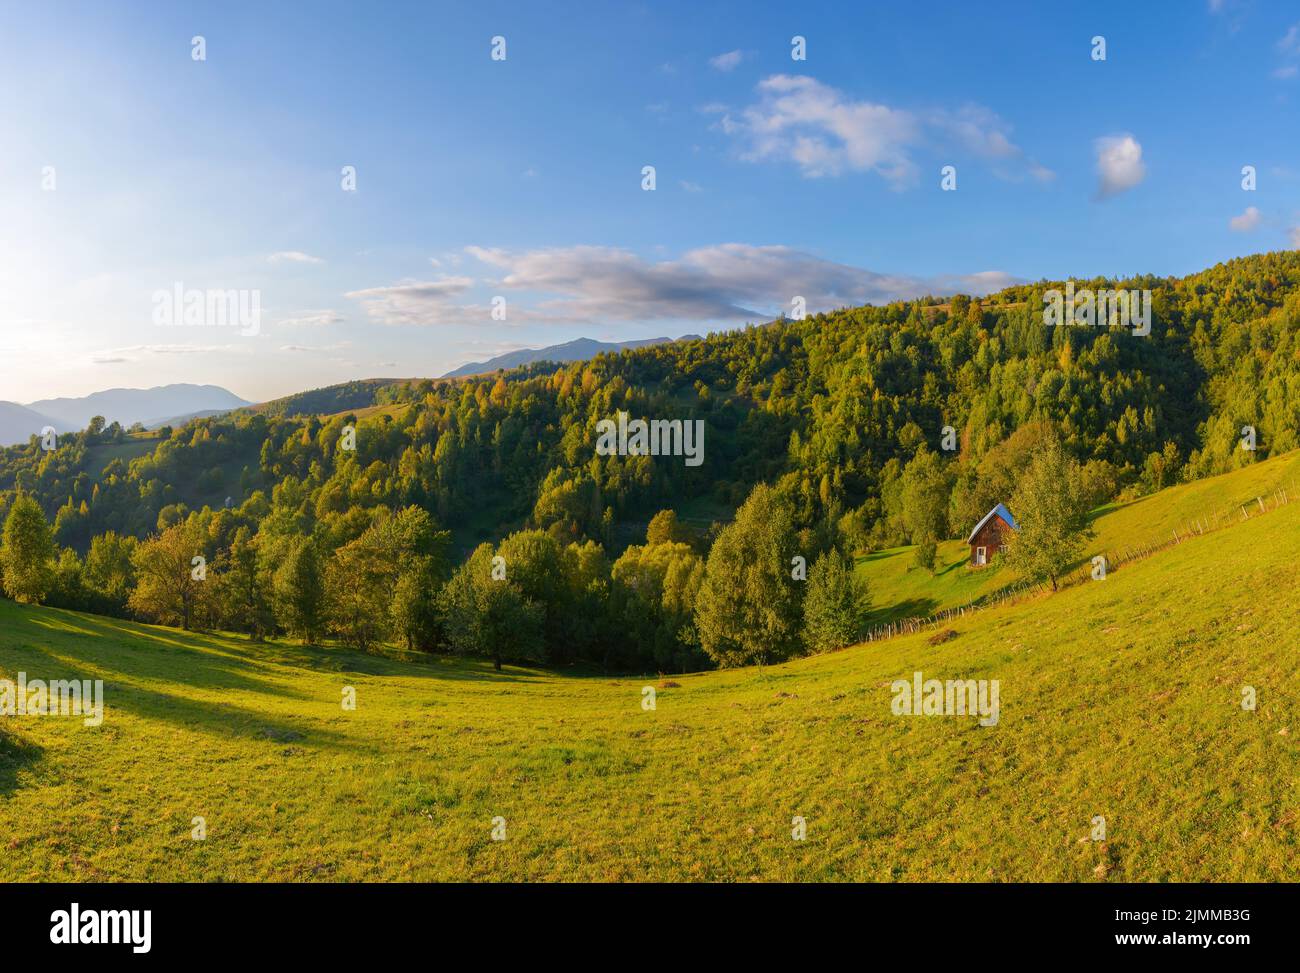 mountainous rural landscape on a sunny afternoon. forested hills and green grassy meadows in evening light. ridge in the distance. sunny weather with Stock Photo